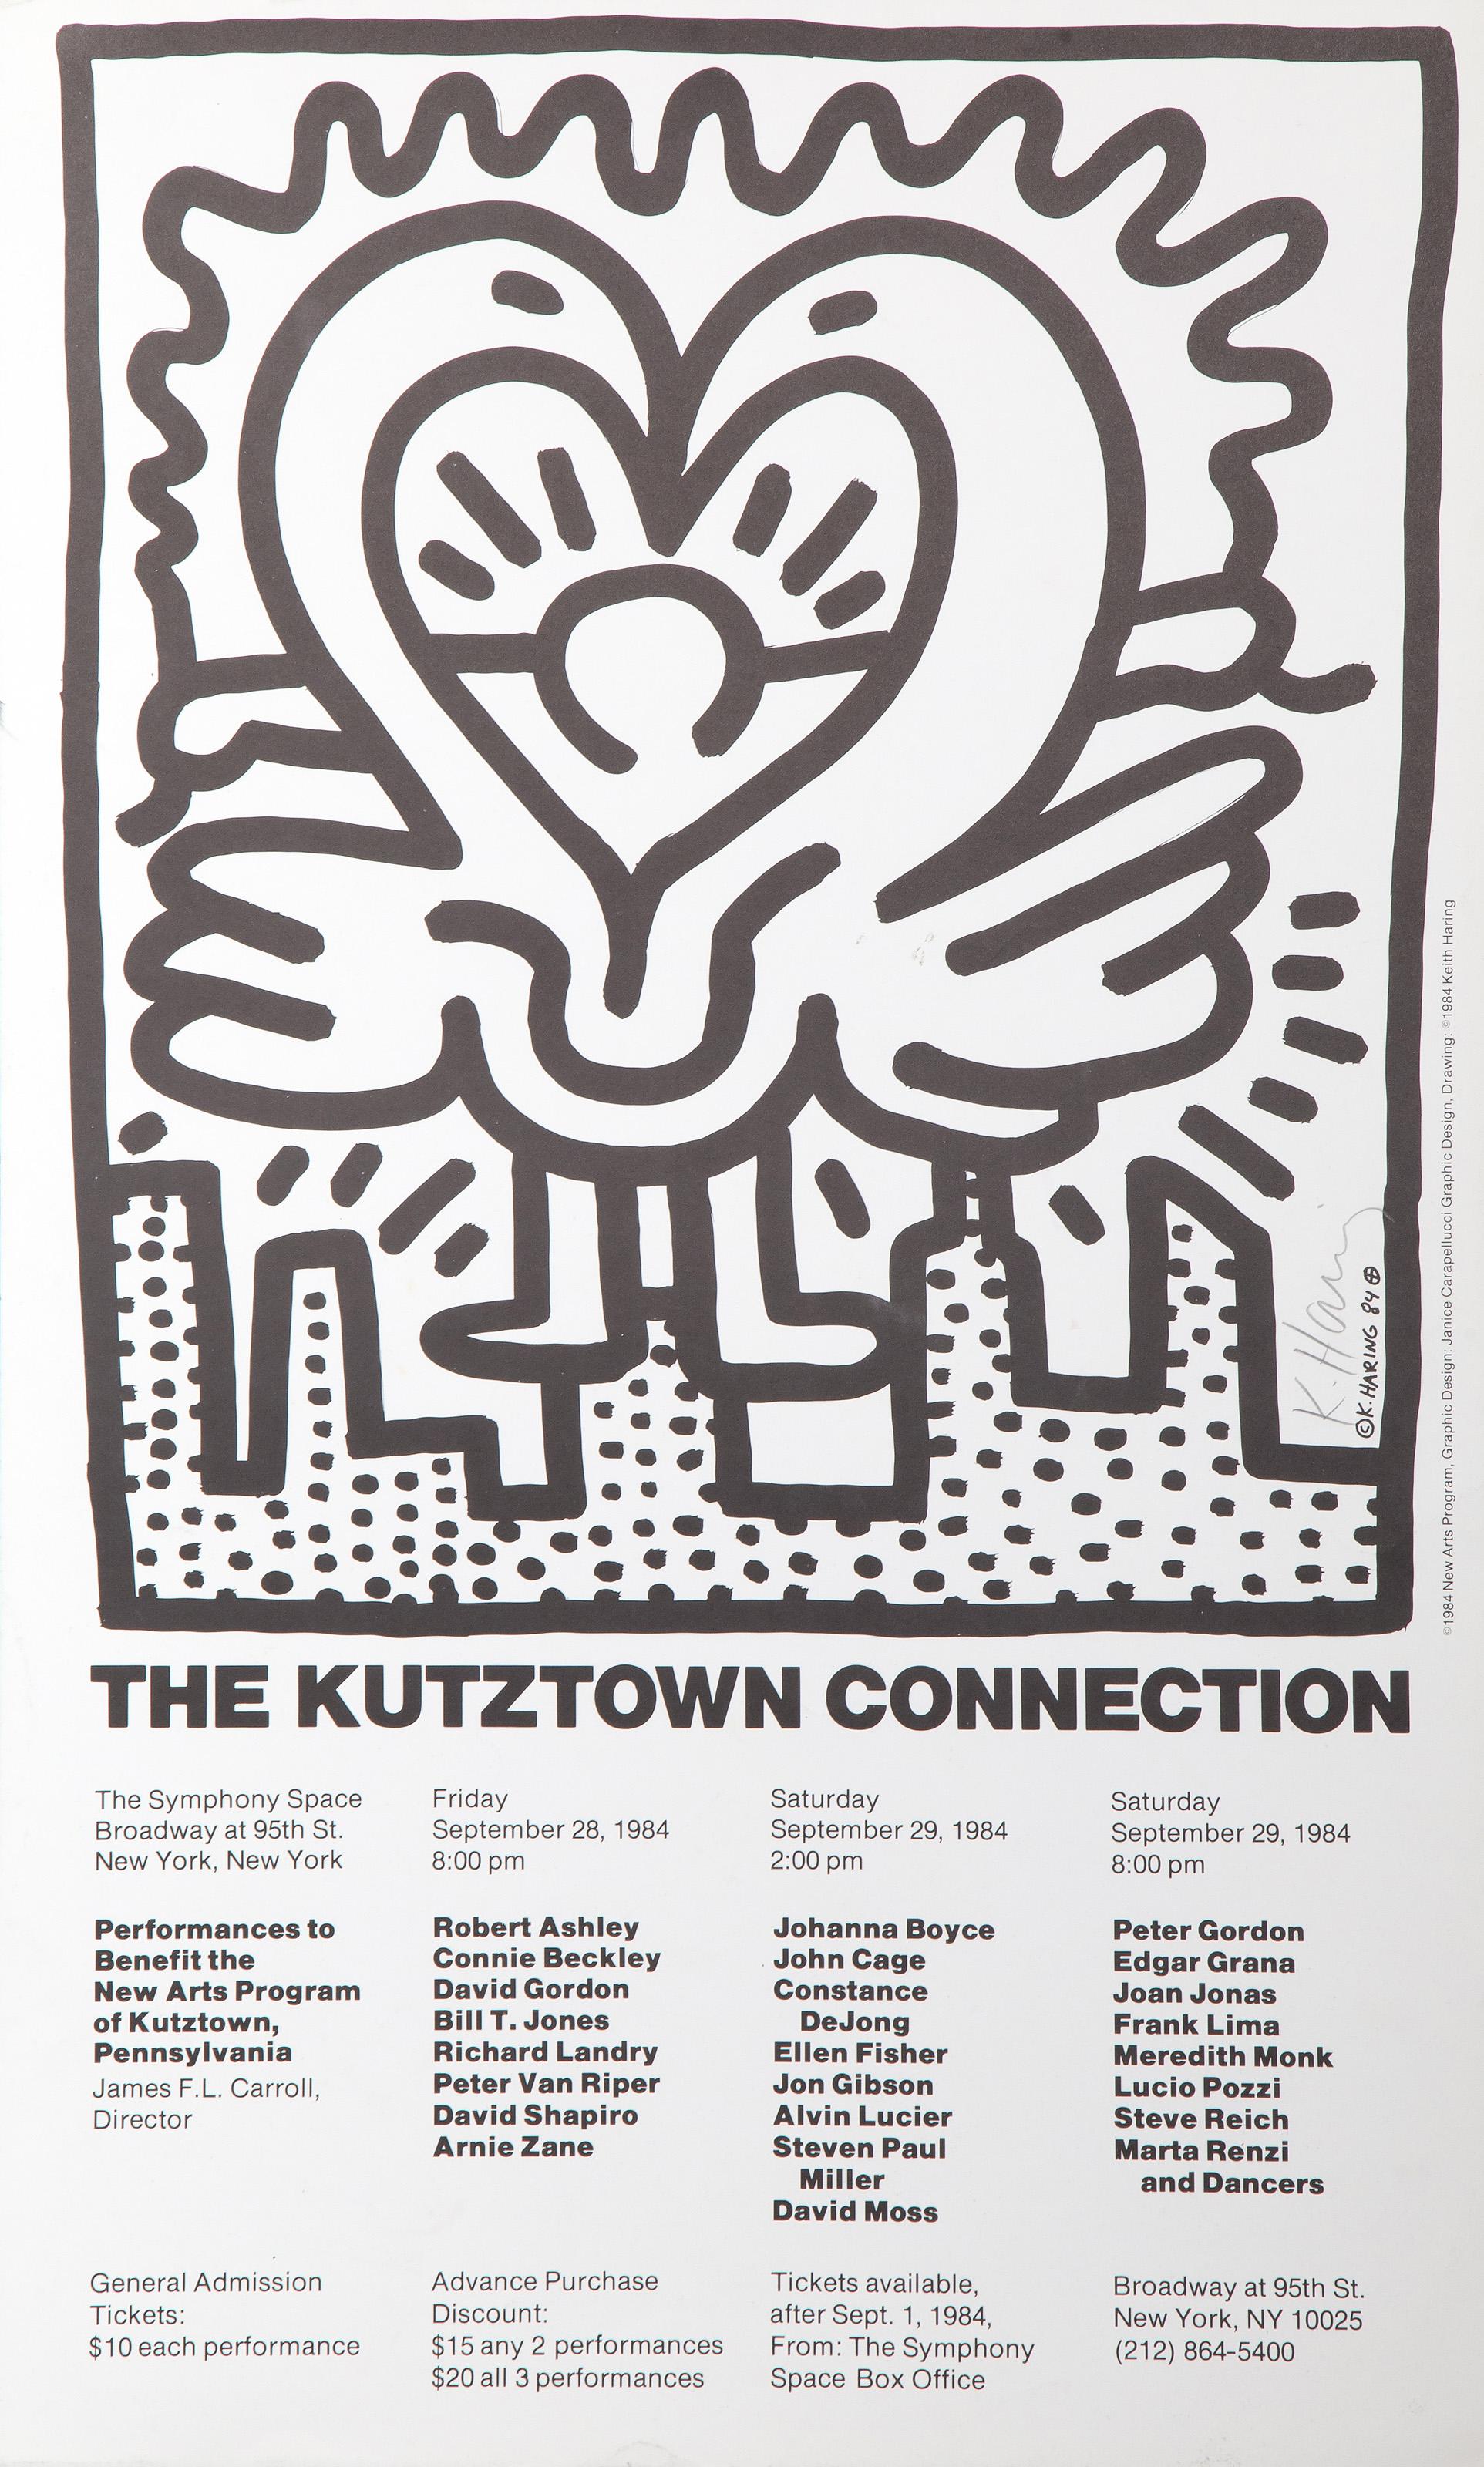 Exhibition Poster: The Kutztown Connection 1984
Keith Haring (After), American (1958–1990)
Date: 1984
Poster on wove paper, signed and dated in the plate, signed in pencil
Size: 33 x 20 in. (83.82 x 50.8 cm)
Publisher: New Arts Program, Inc.,